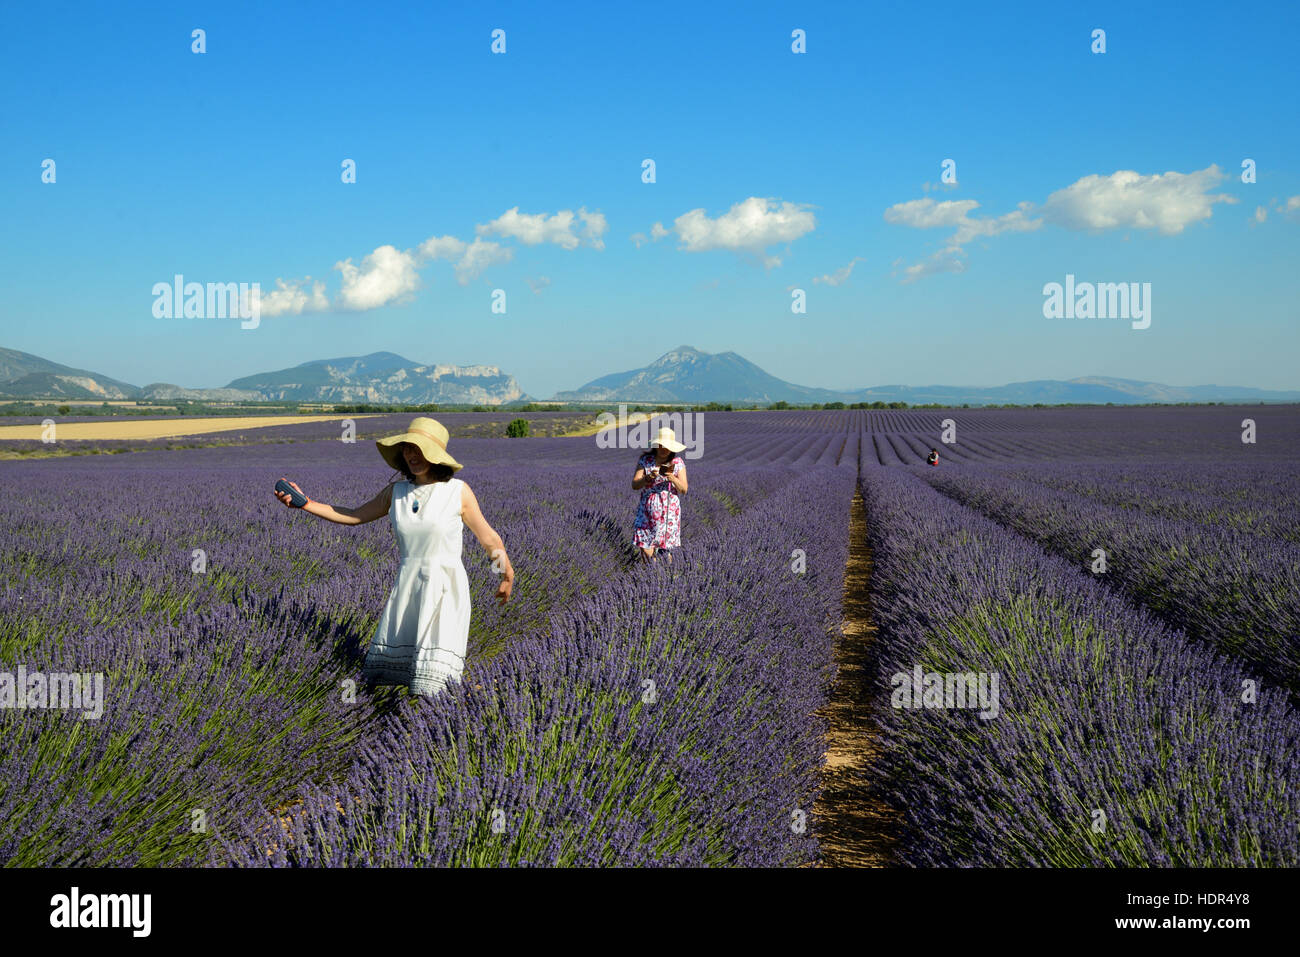 Chinese Tourists Visiting the Lavender Fields of the Valensole Plateau Provence France Stock Photo